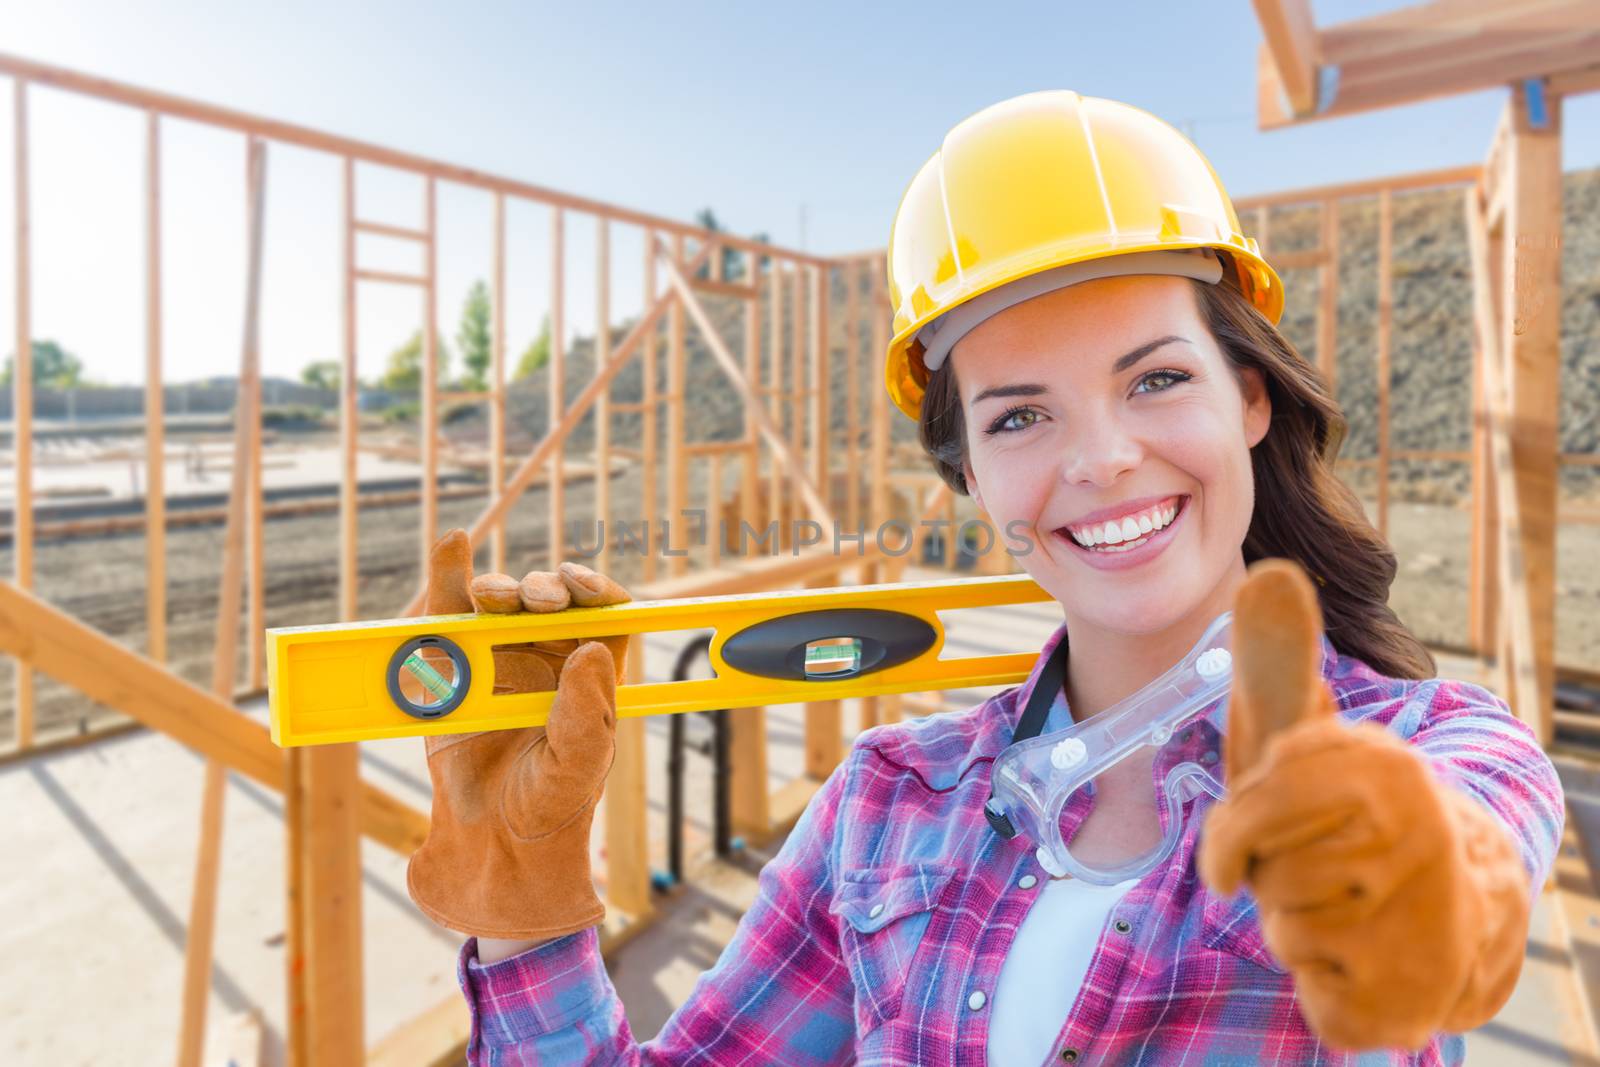 Female Construction Worker with Thumbs Up Holding Level Wearing Gloves, Hard Hat and Protective Goggles at Construction Site.